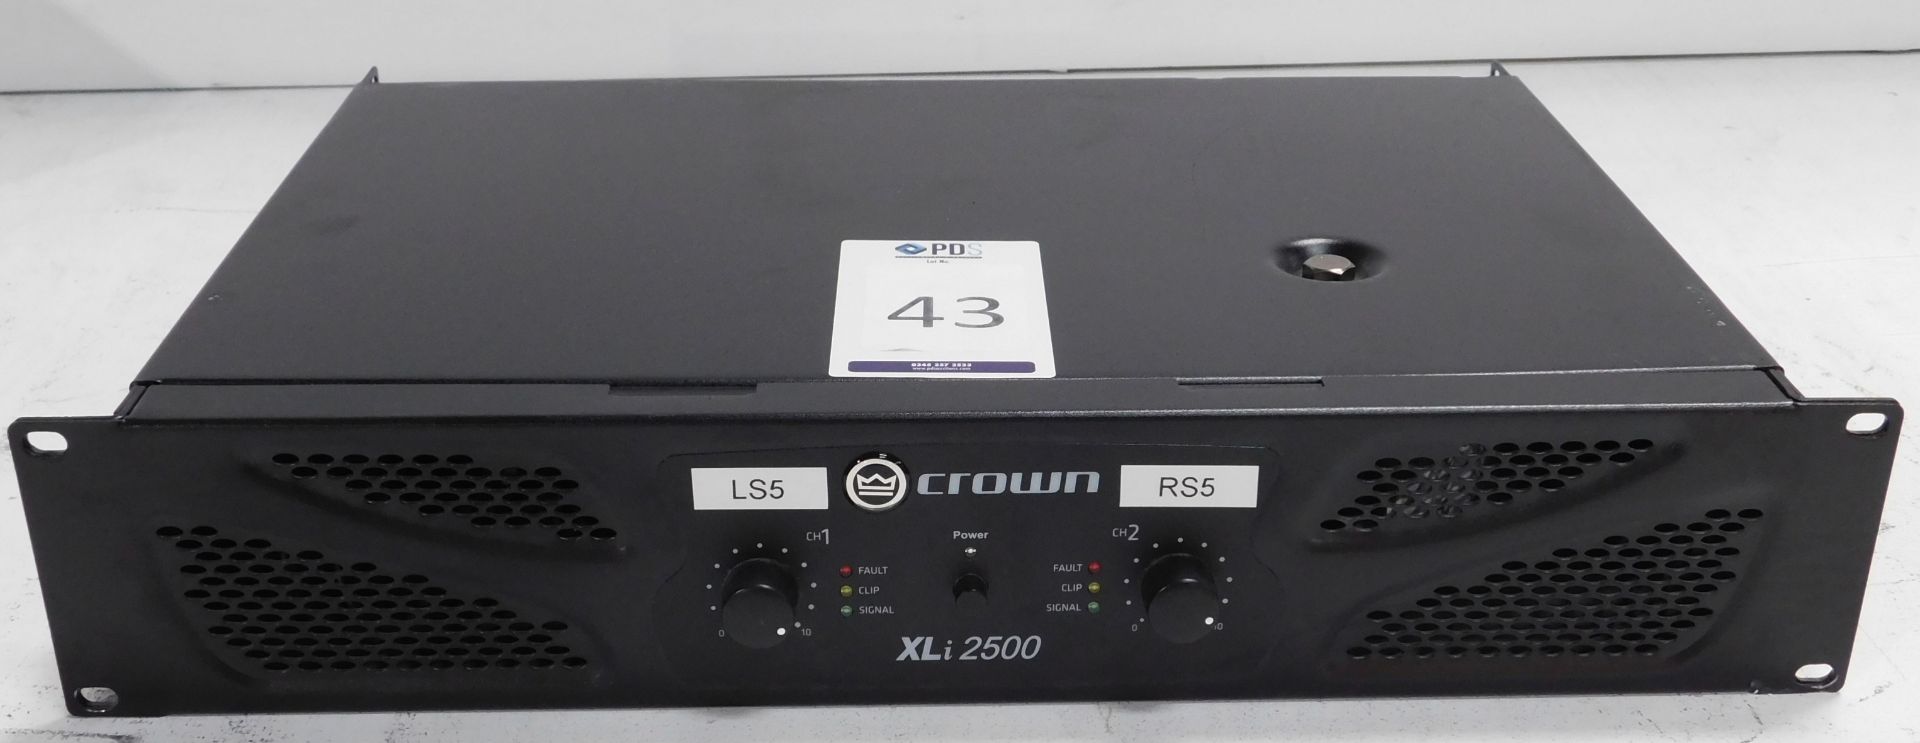 Crown XLi2500 Rack-Mount Power Amplifier (Location Brentwood. Please Refer to General Notes)